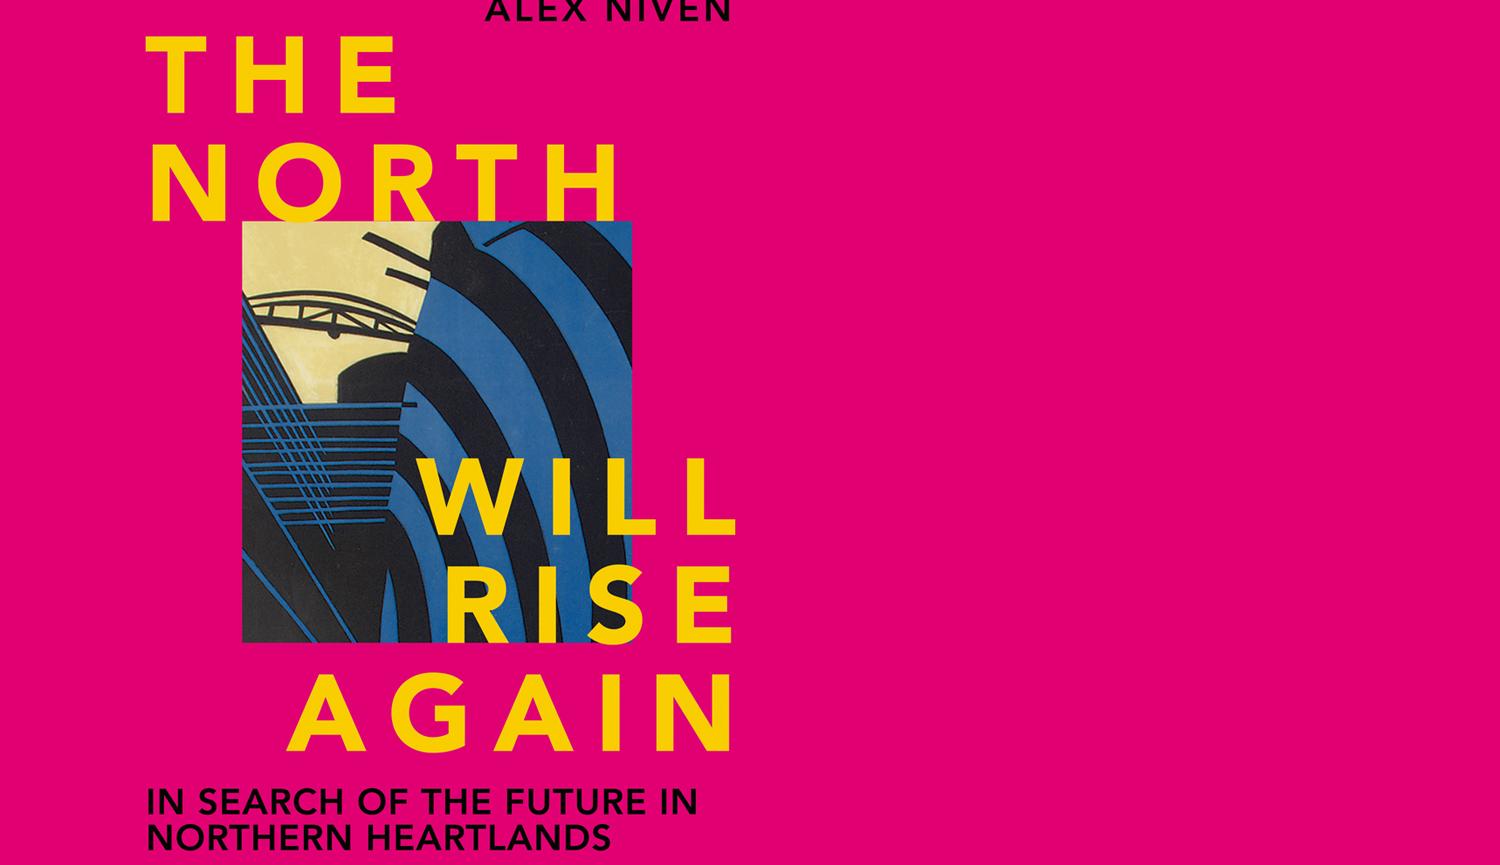 The North Will Rise Again by Alex Niven - book launch